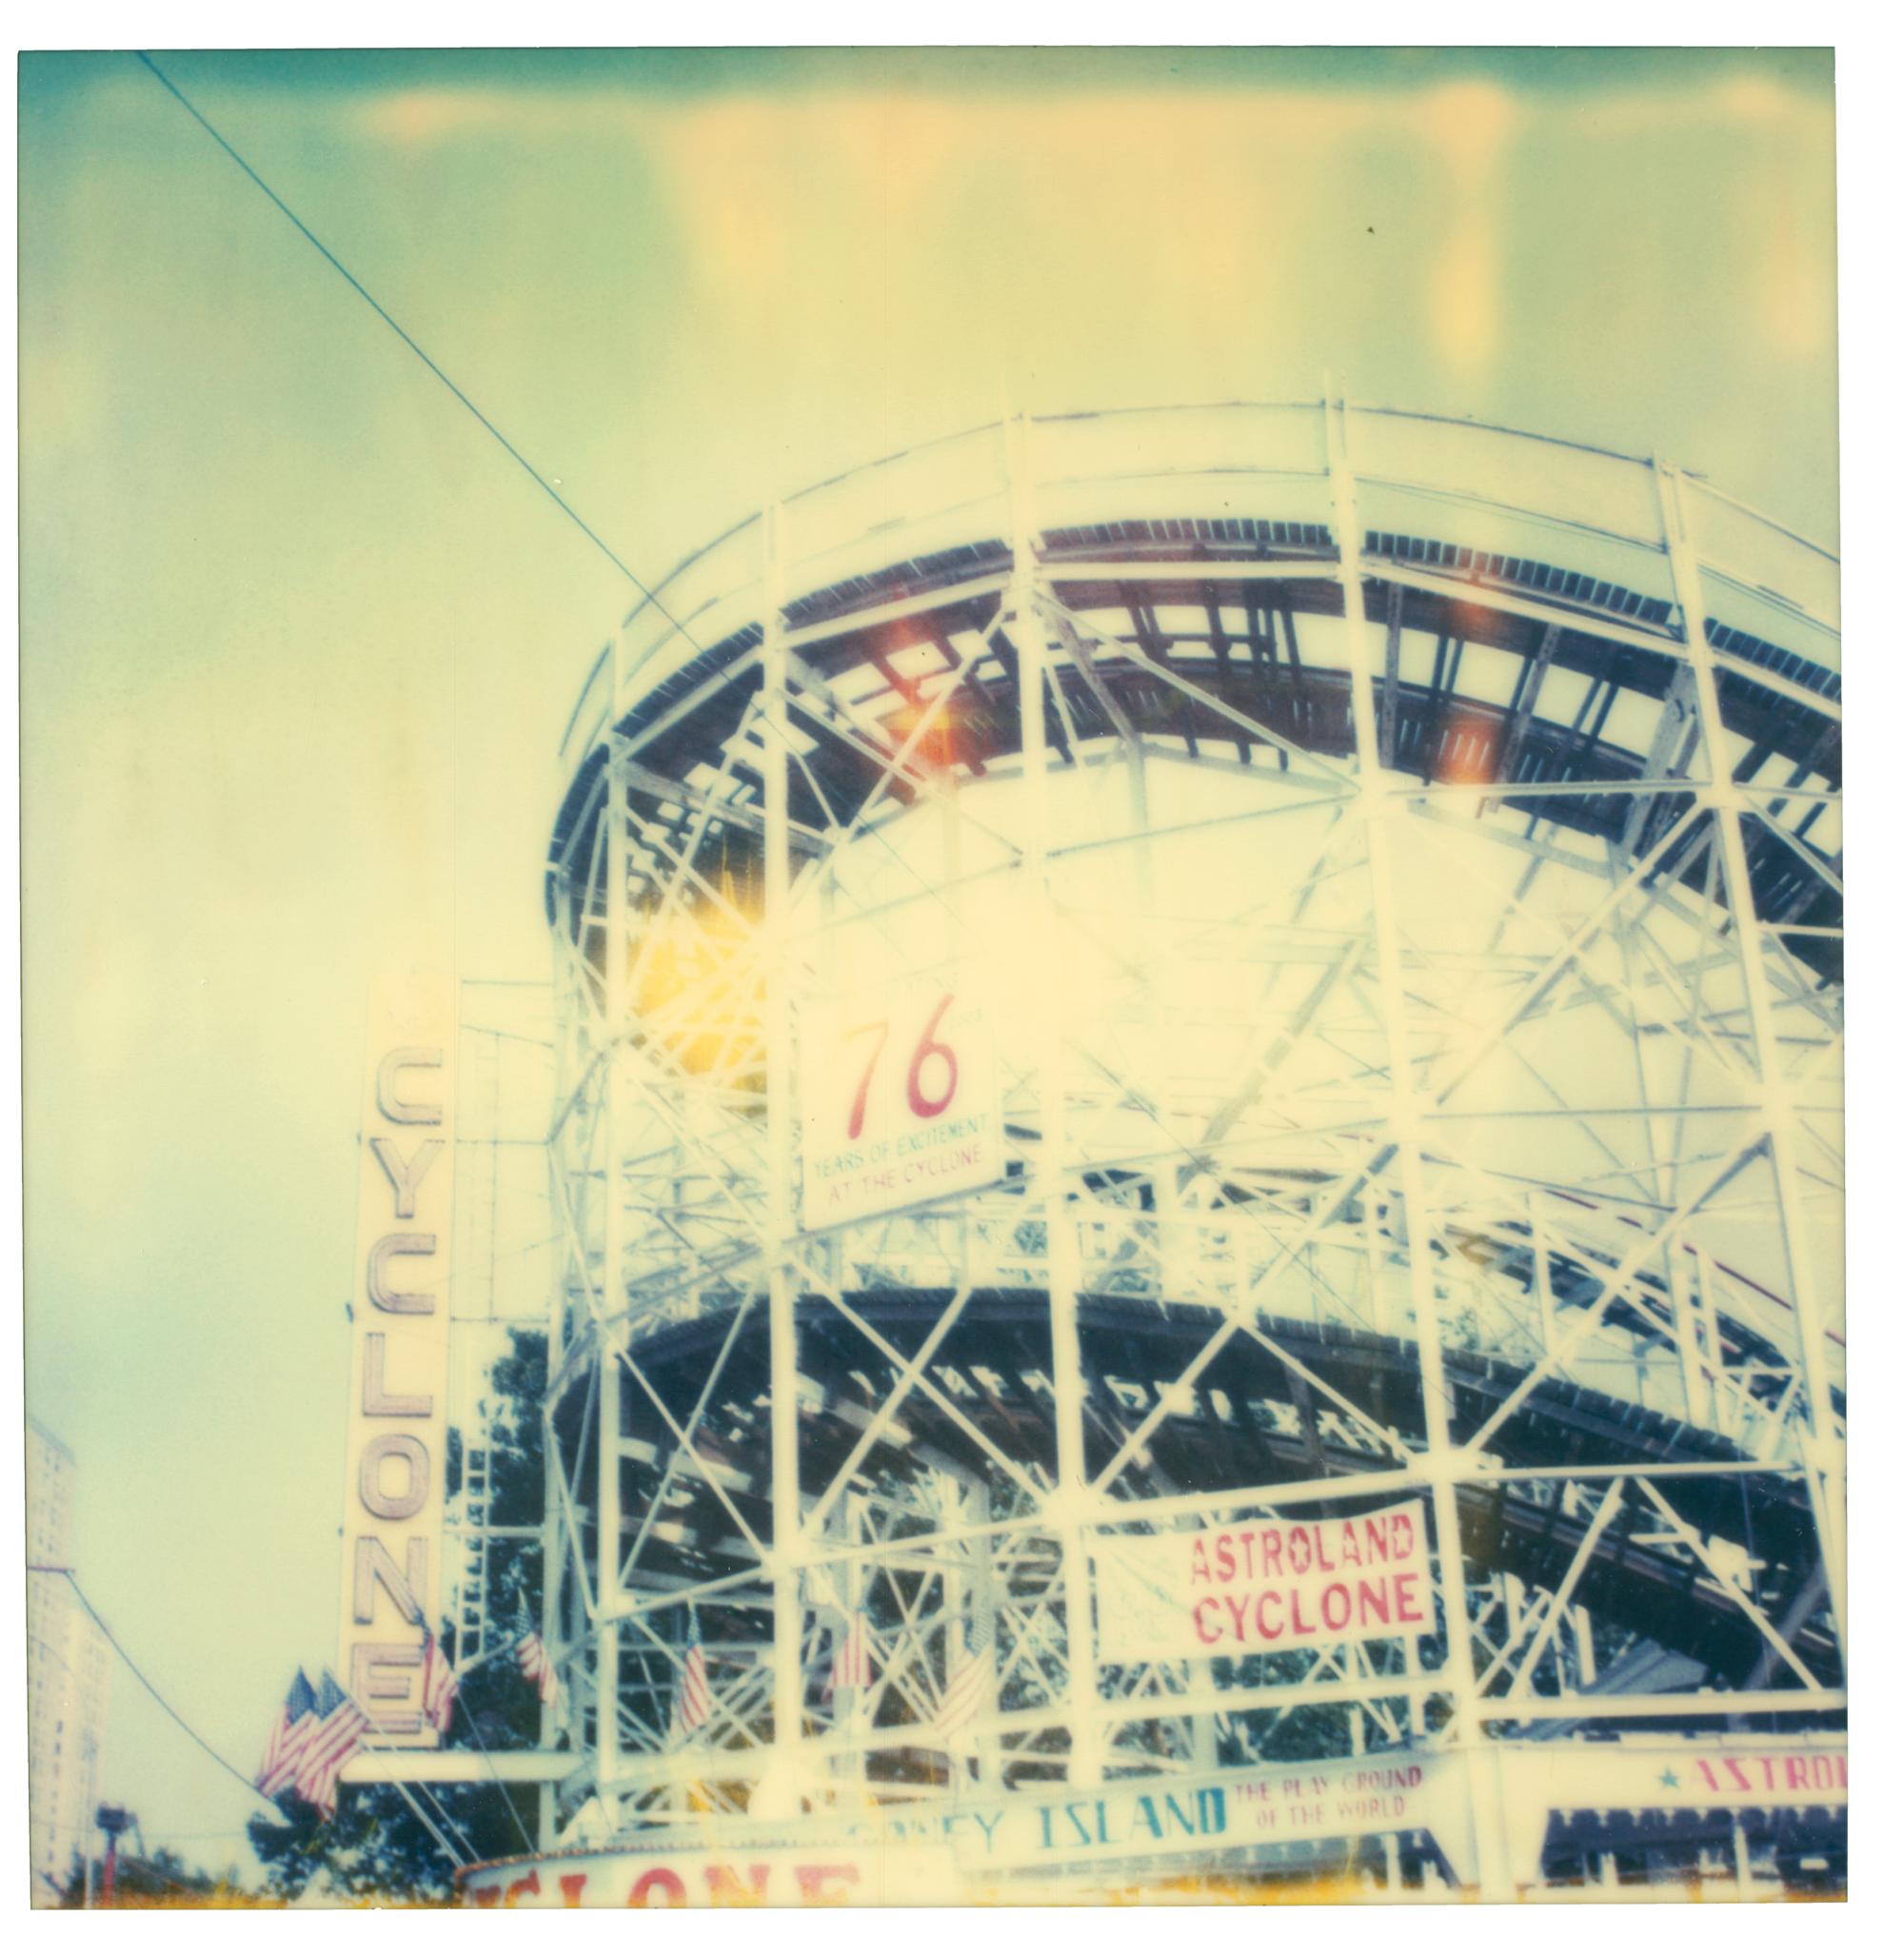 Stefanie Schneider Color Photograph - Cyclone (Stay) - Coney Island, 21 Century, Contemporary, Icons, Landscape